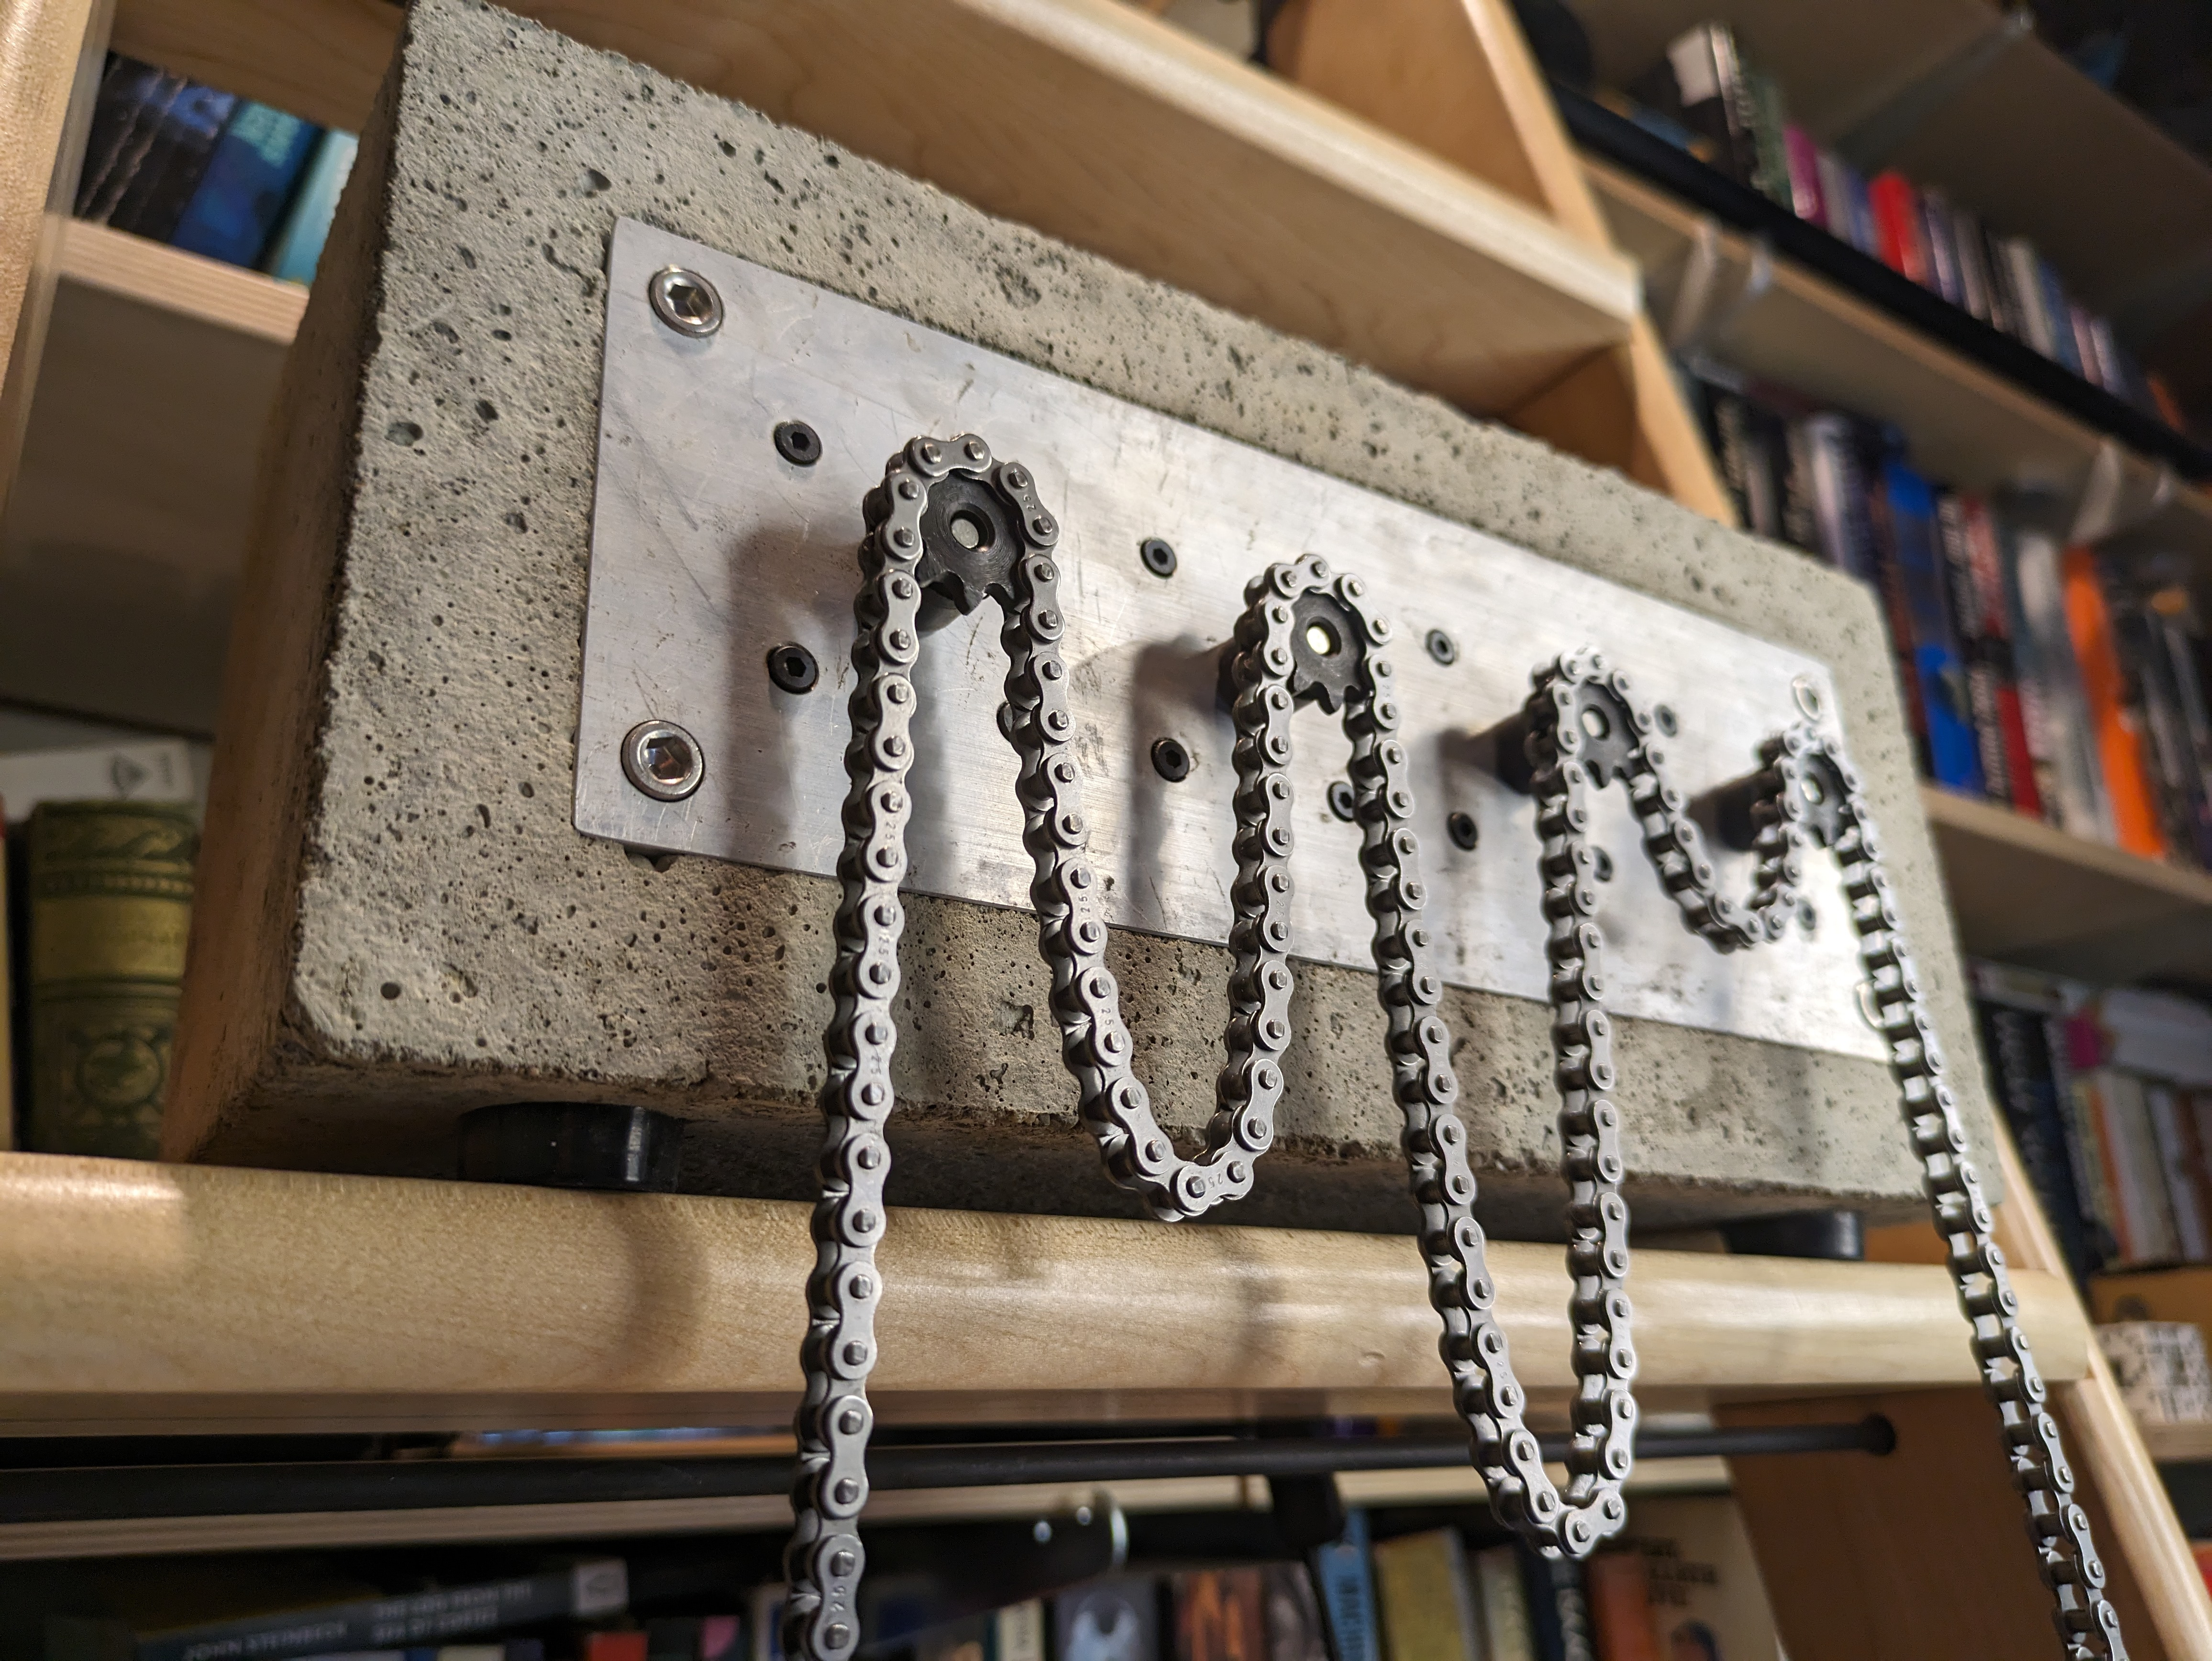 A concrete block sits on a library ladder. Embedded in the front face of the block is an aluminum plate, through which 4 small sprockets project. Over these a length of roller chain is draped, forming loops of various lengths between them.